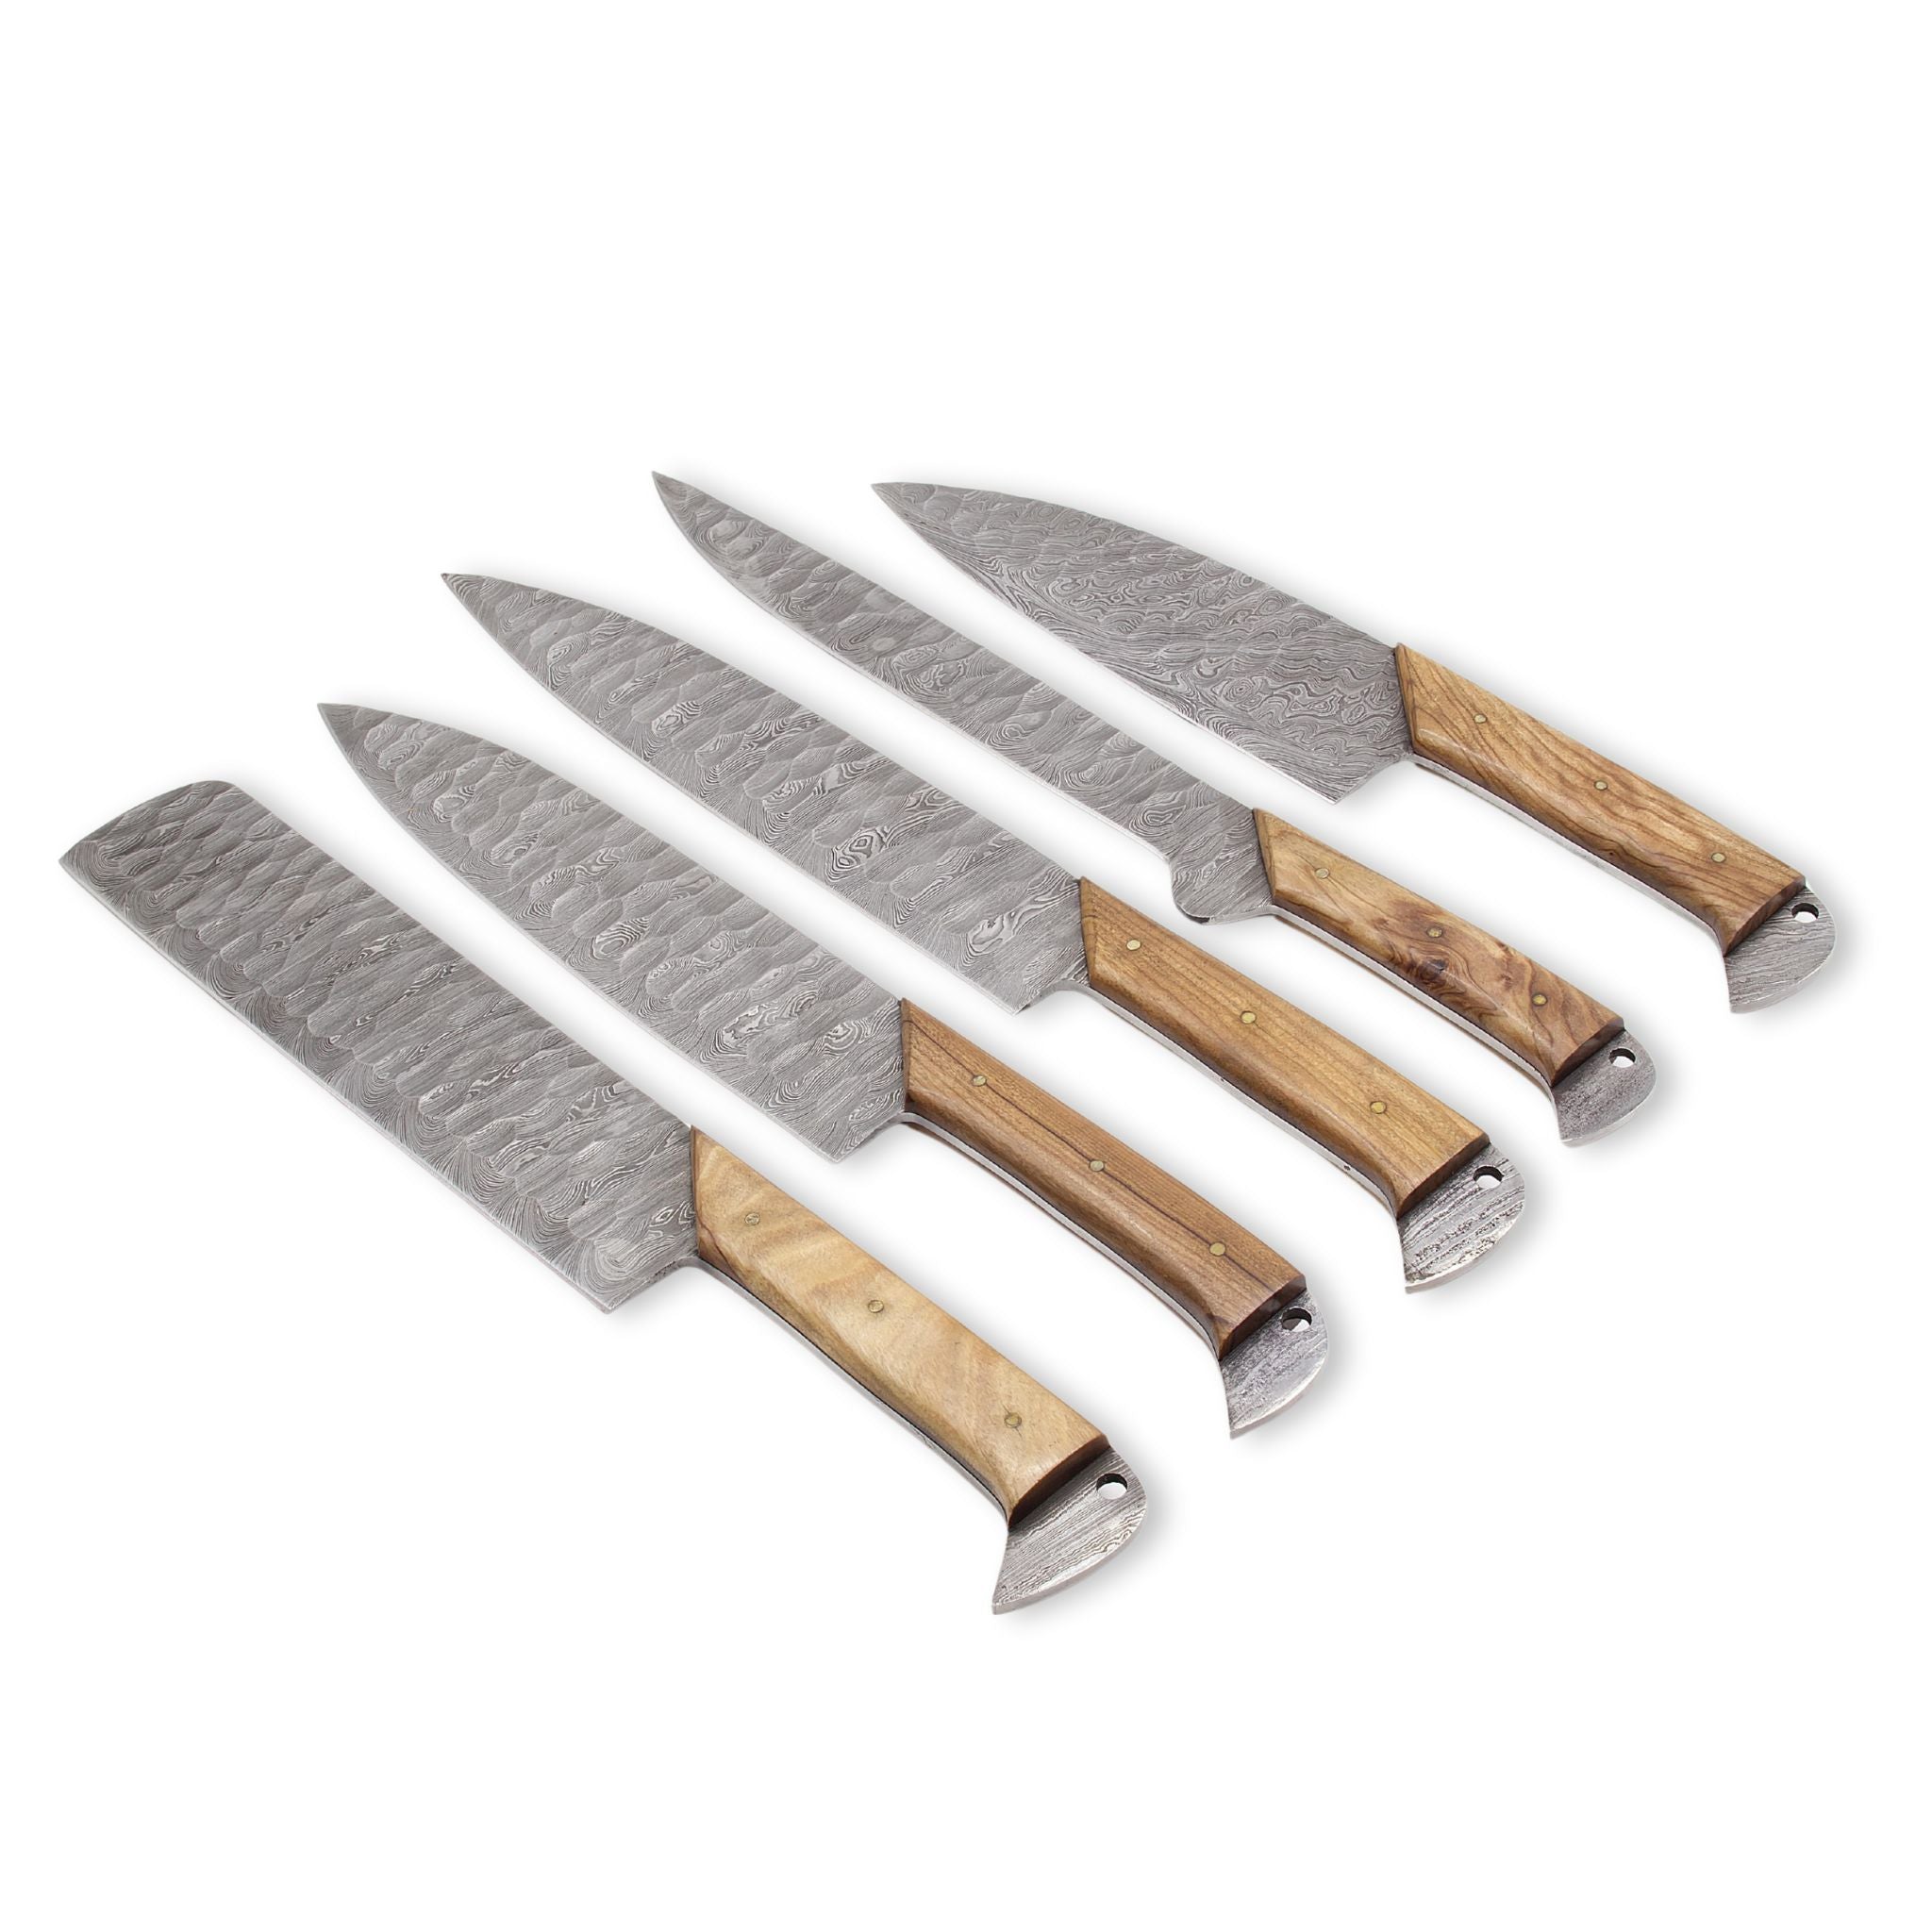 You don't need a knife set : r/chefknives